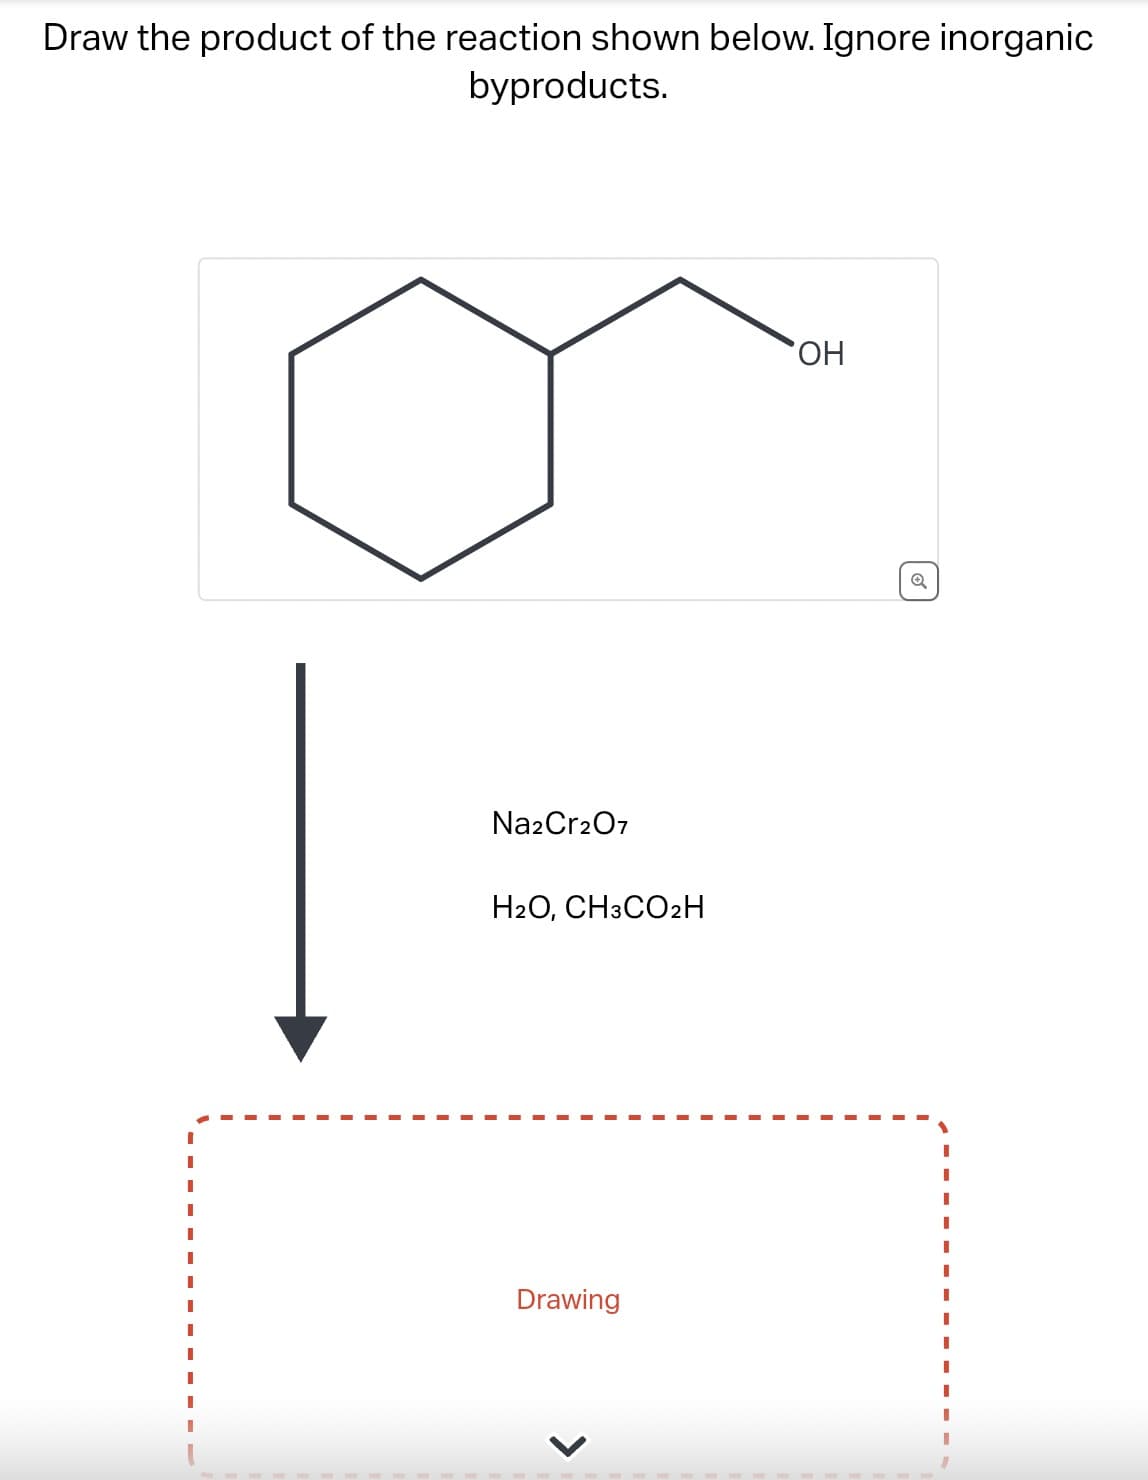 Draw the product of the reaction shown below. Ignore inorganic
byproducts.
Na2Cr2O7
H2O, CH3CO₂H
Drawing
OH
Q